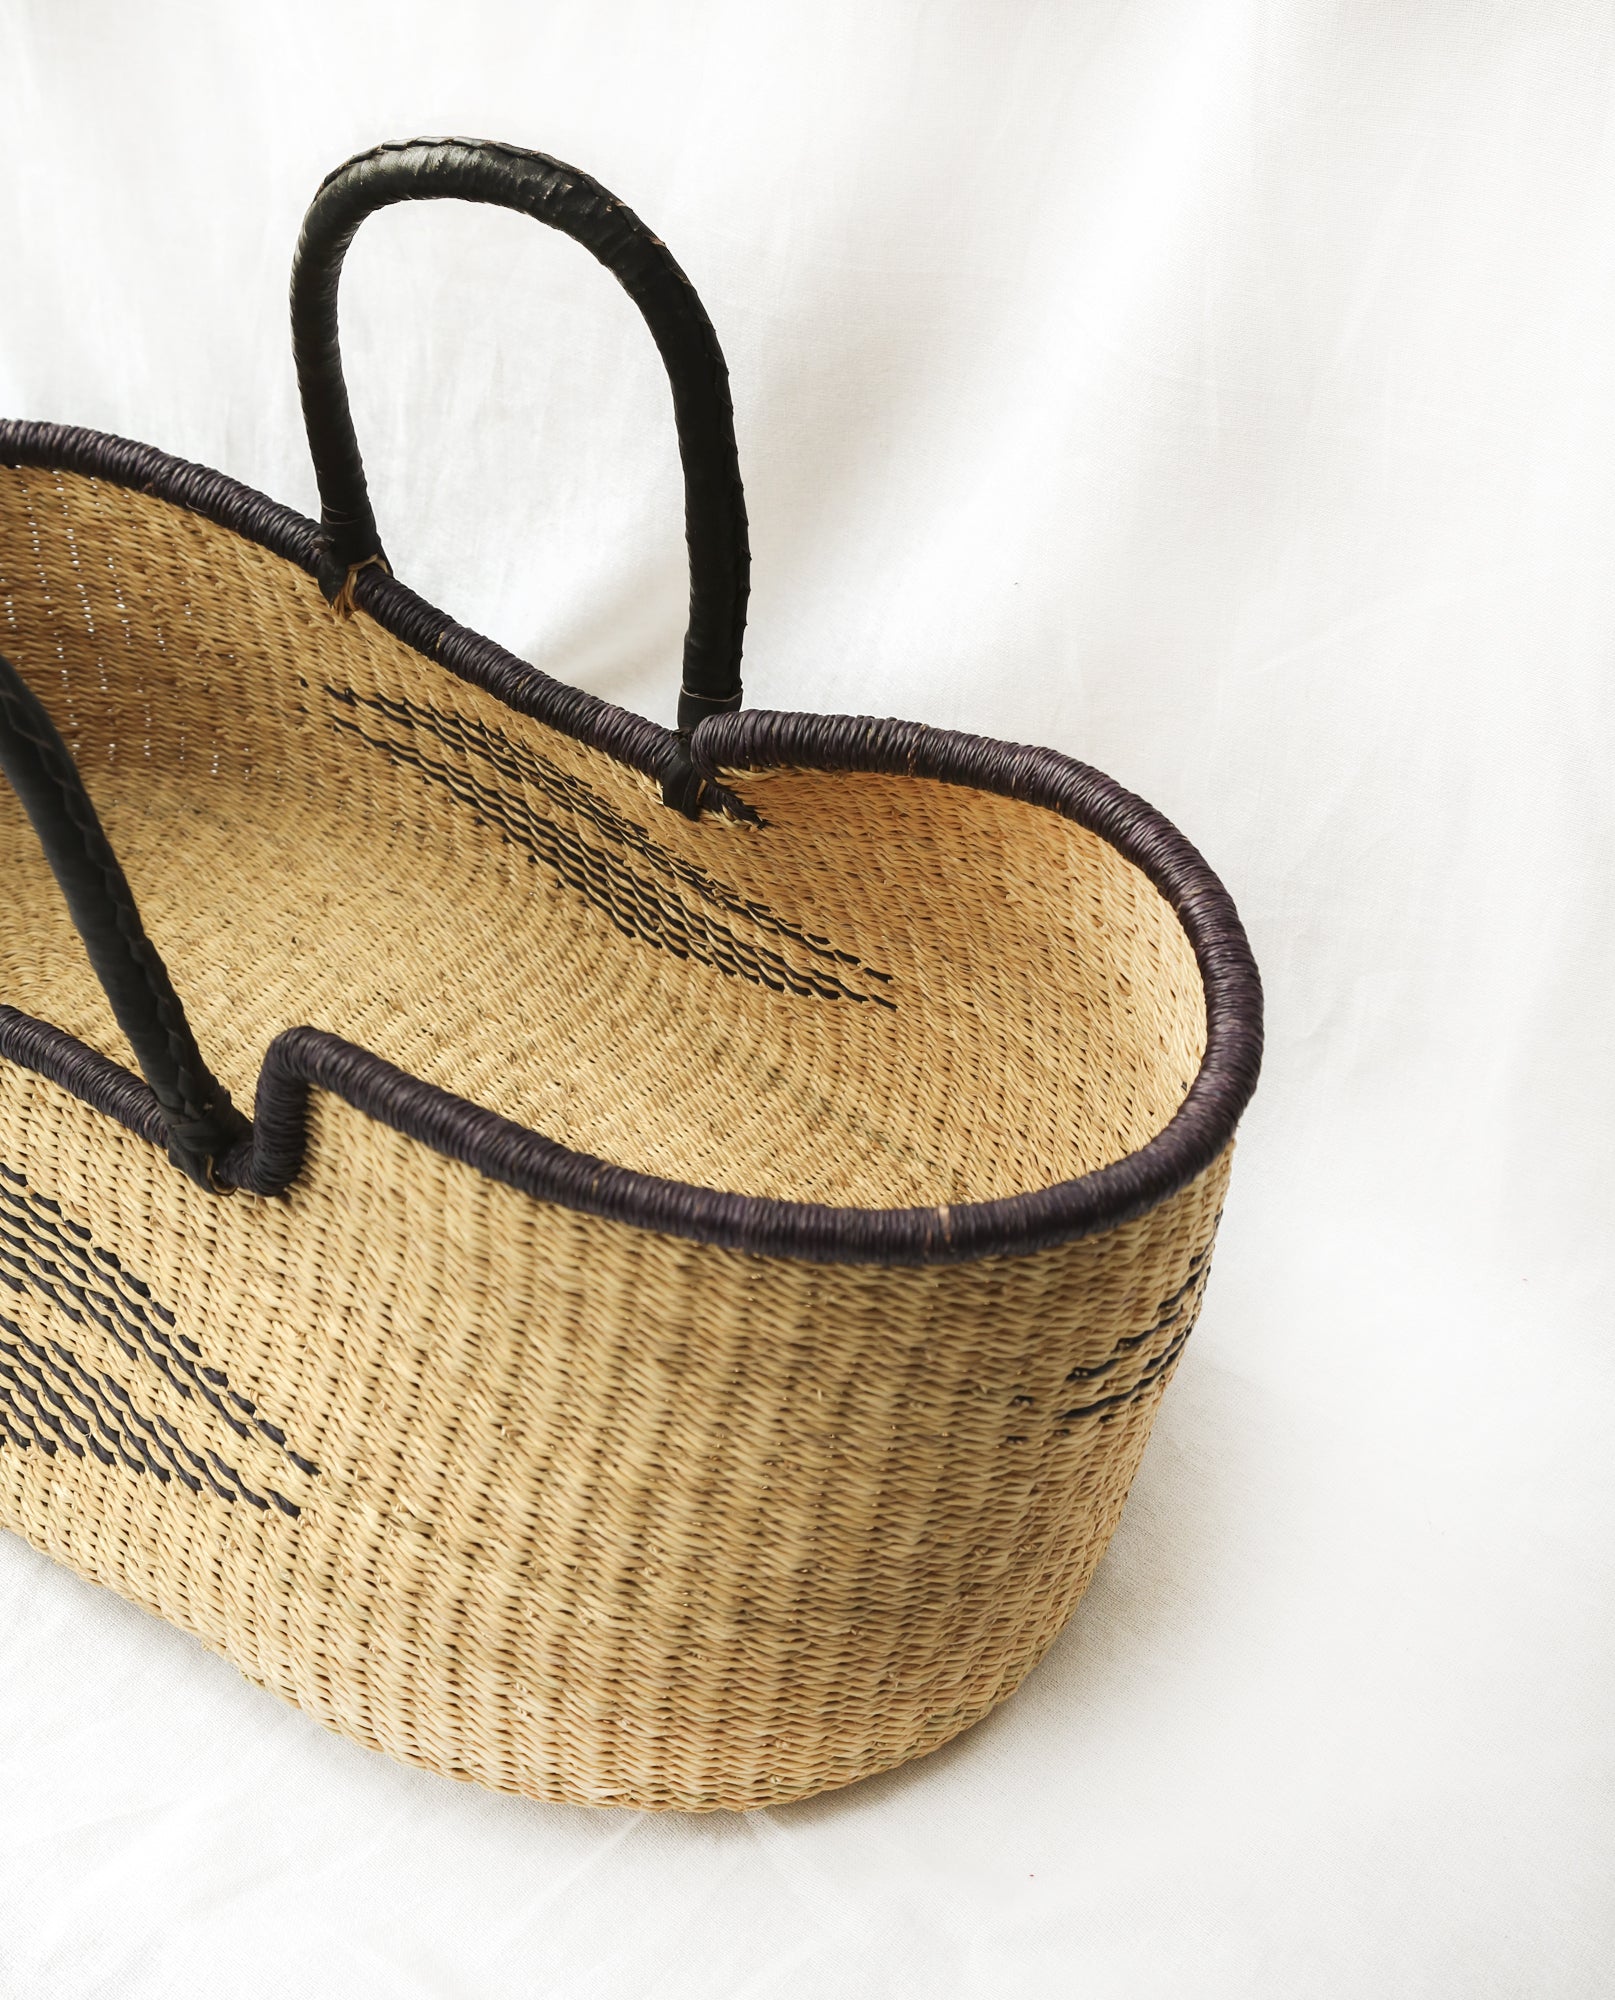 KOJO Handwoven Moses Basket with Leather Handles